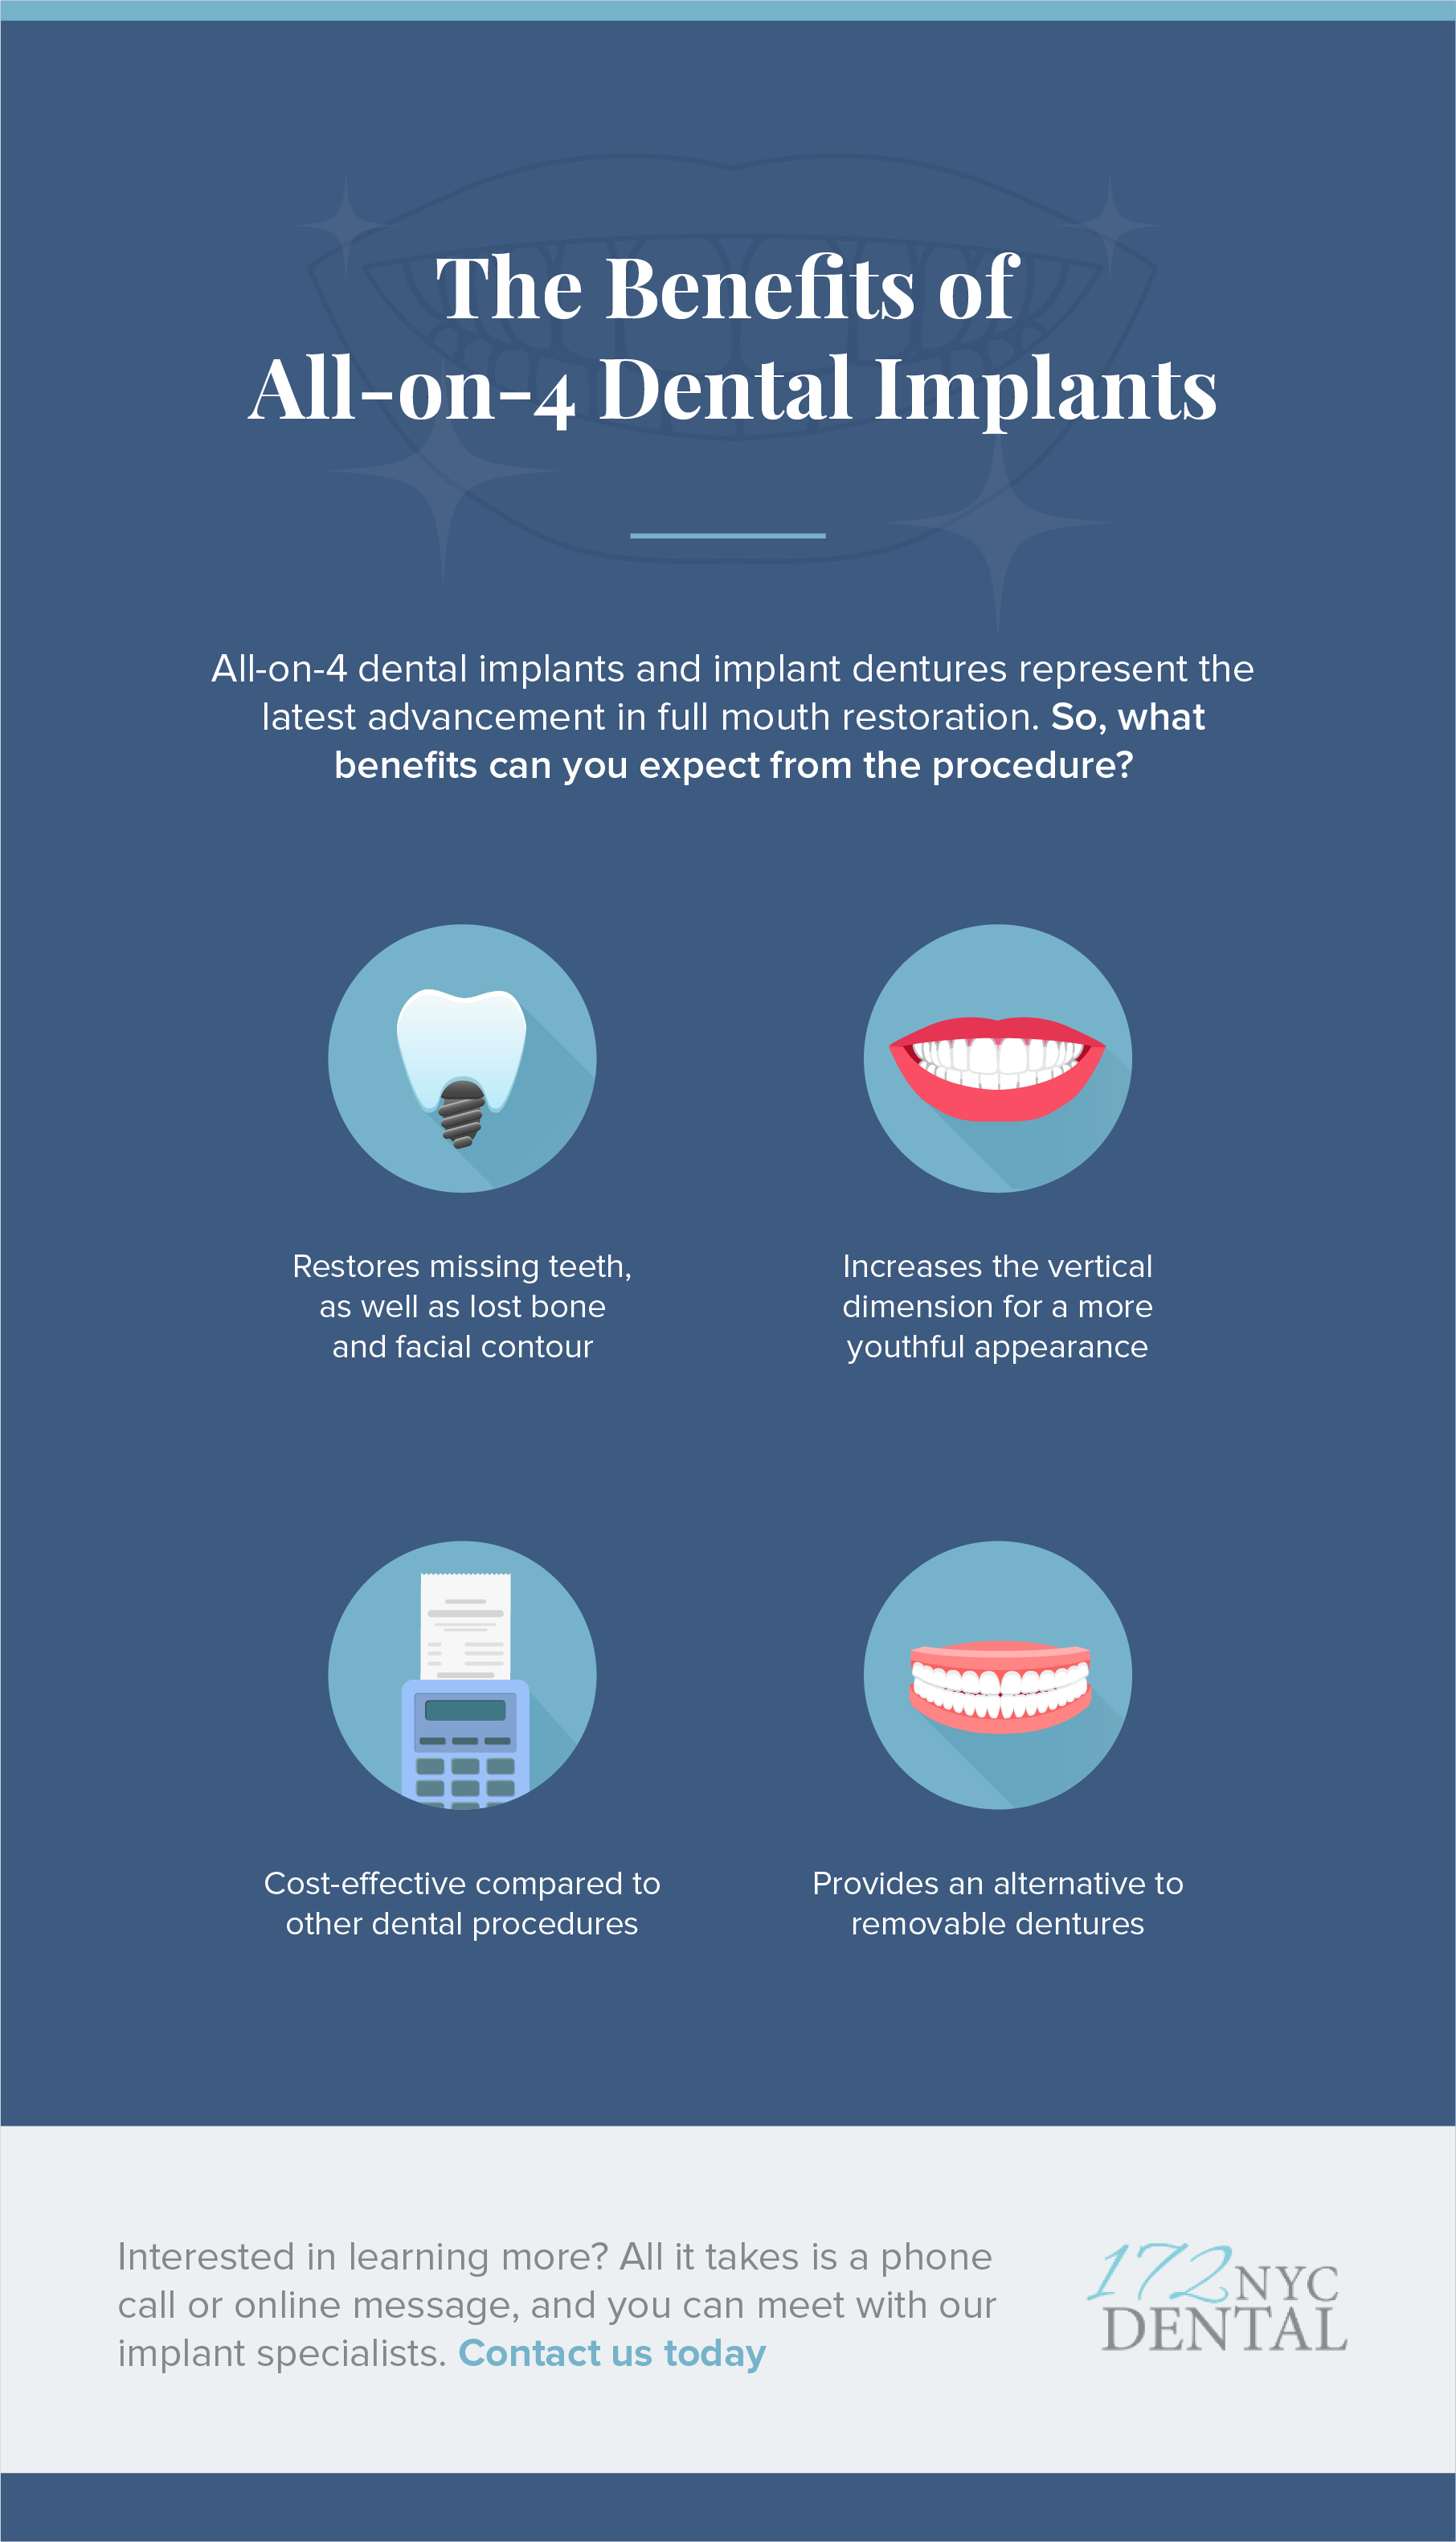 The benefits of all-on-4 dental implants